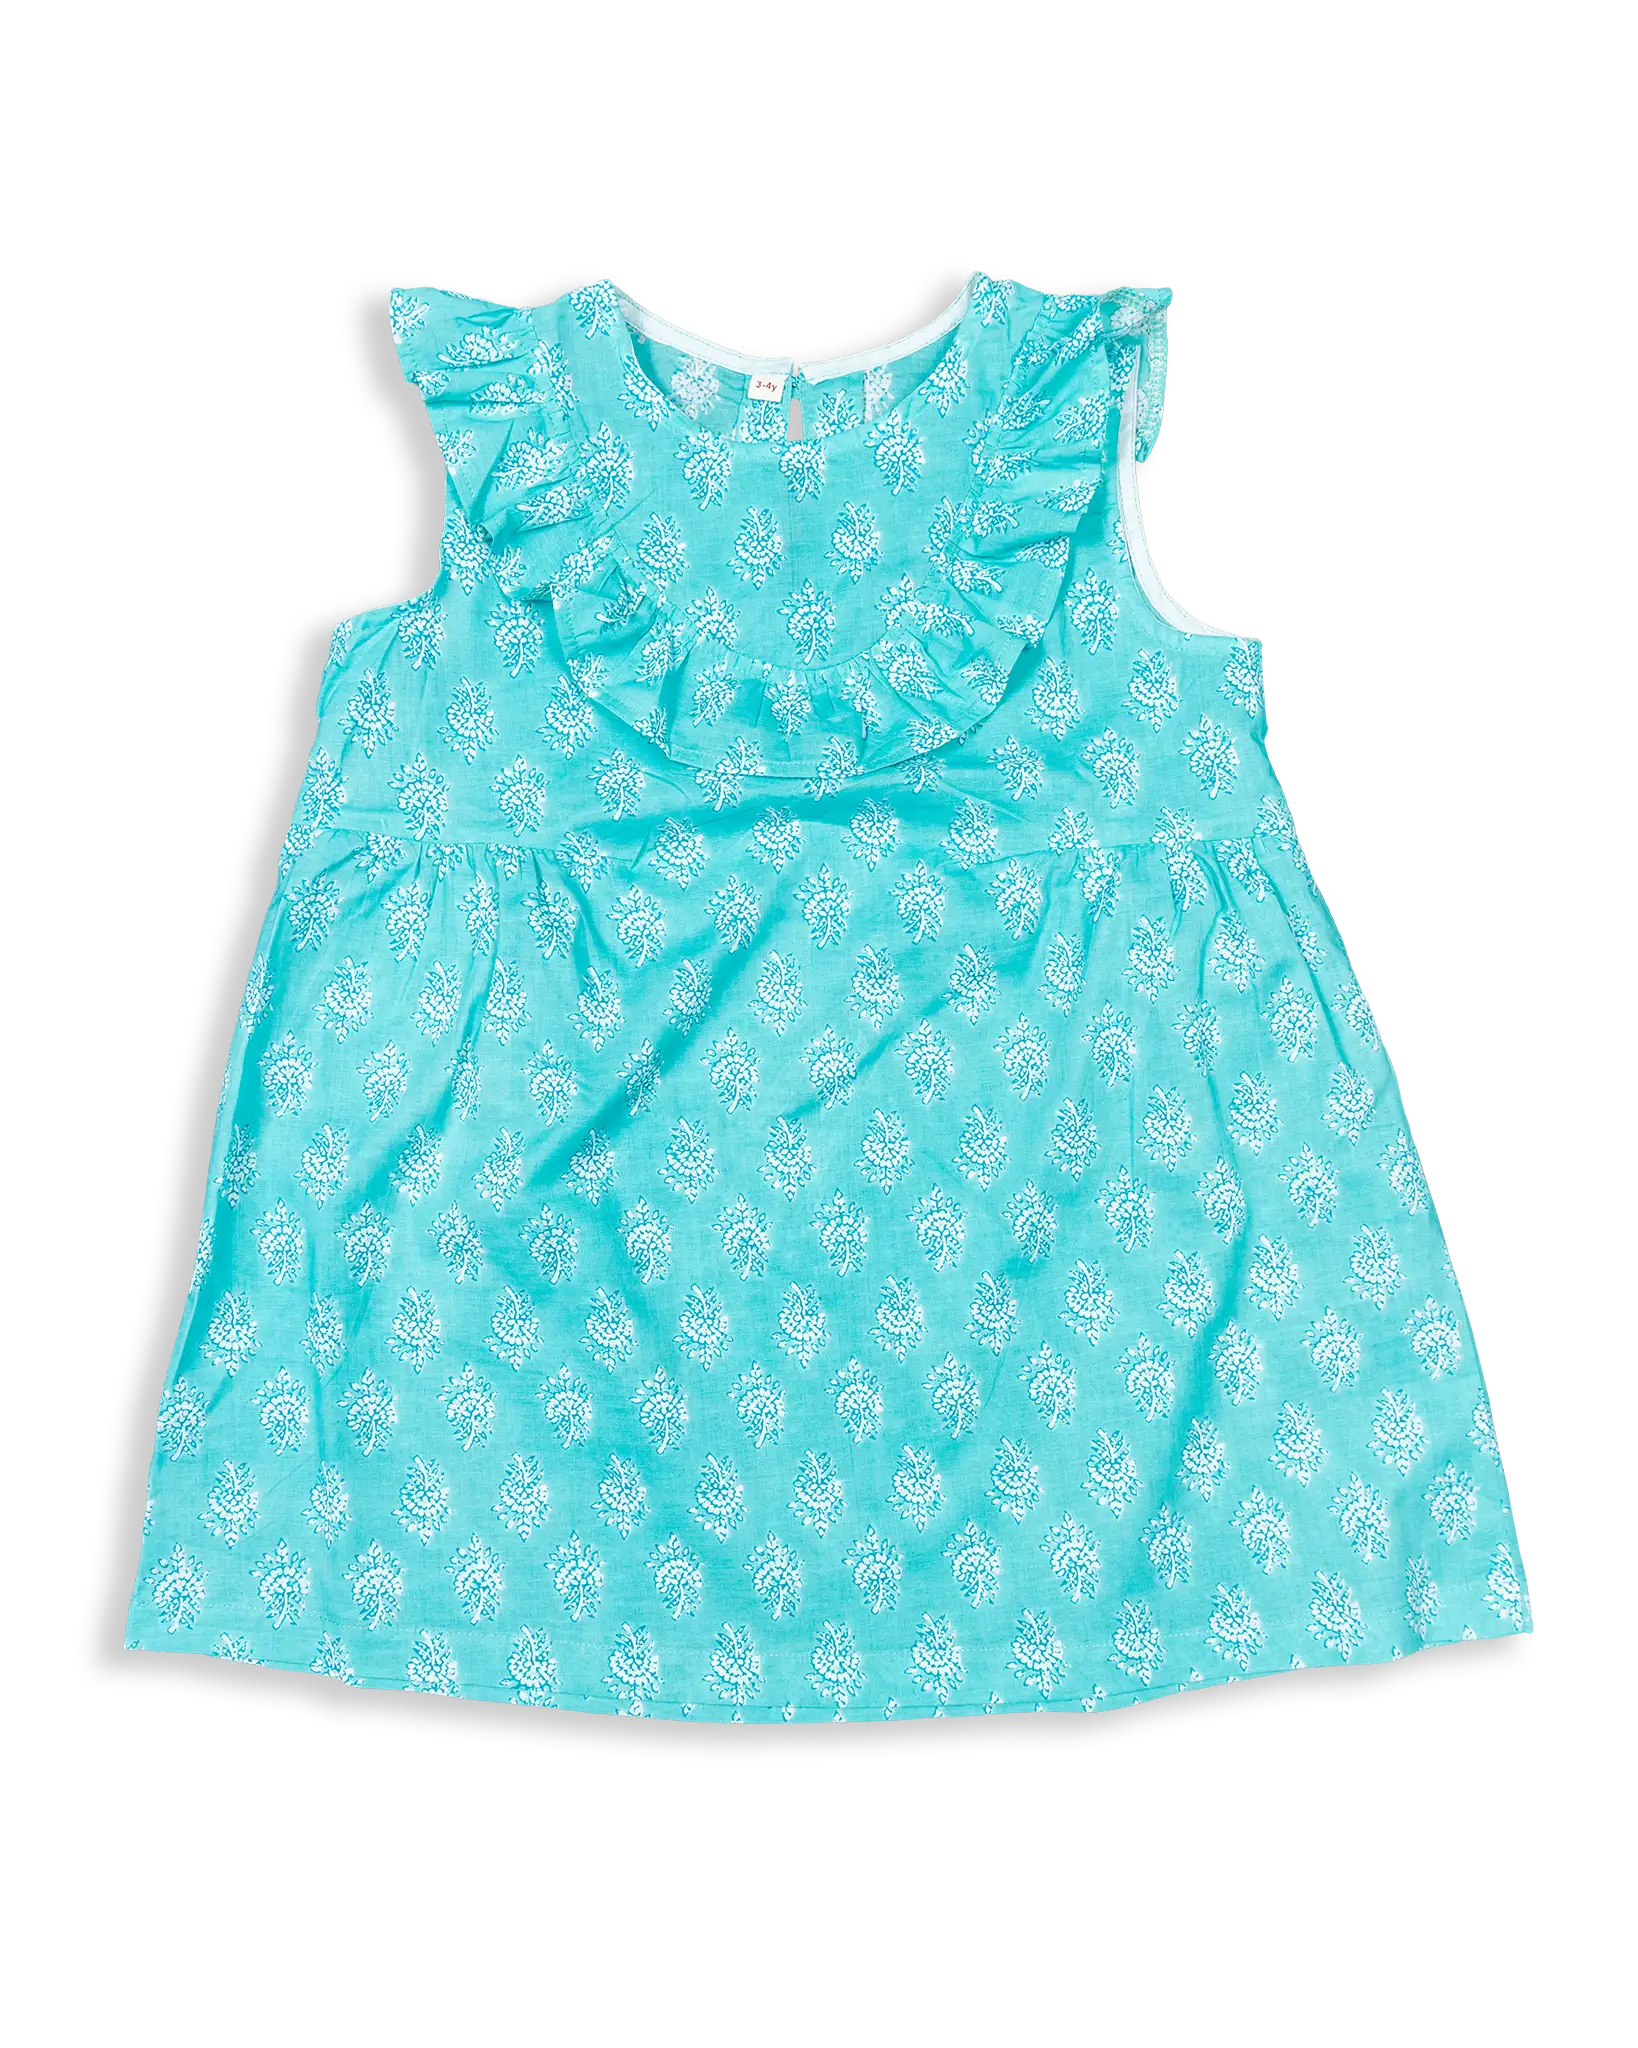 Stay cool and comfortable this summer in the Pretty Priya dress. Made from 100% cotton and handmade in Nepal, this lightweight dress is perfect for hot days and nights. With its beautiful prints and easy fit, your princess will be sure to stay fashionable and stylish all season long.